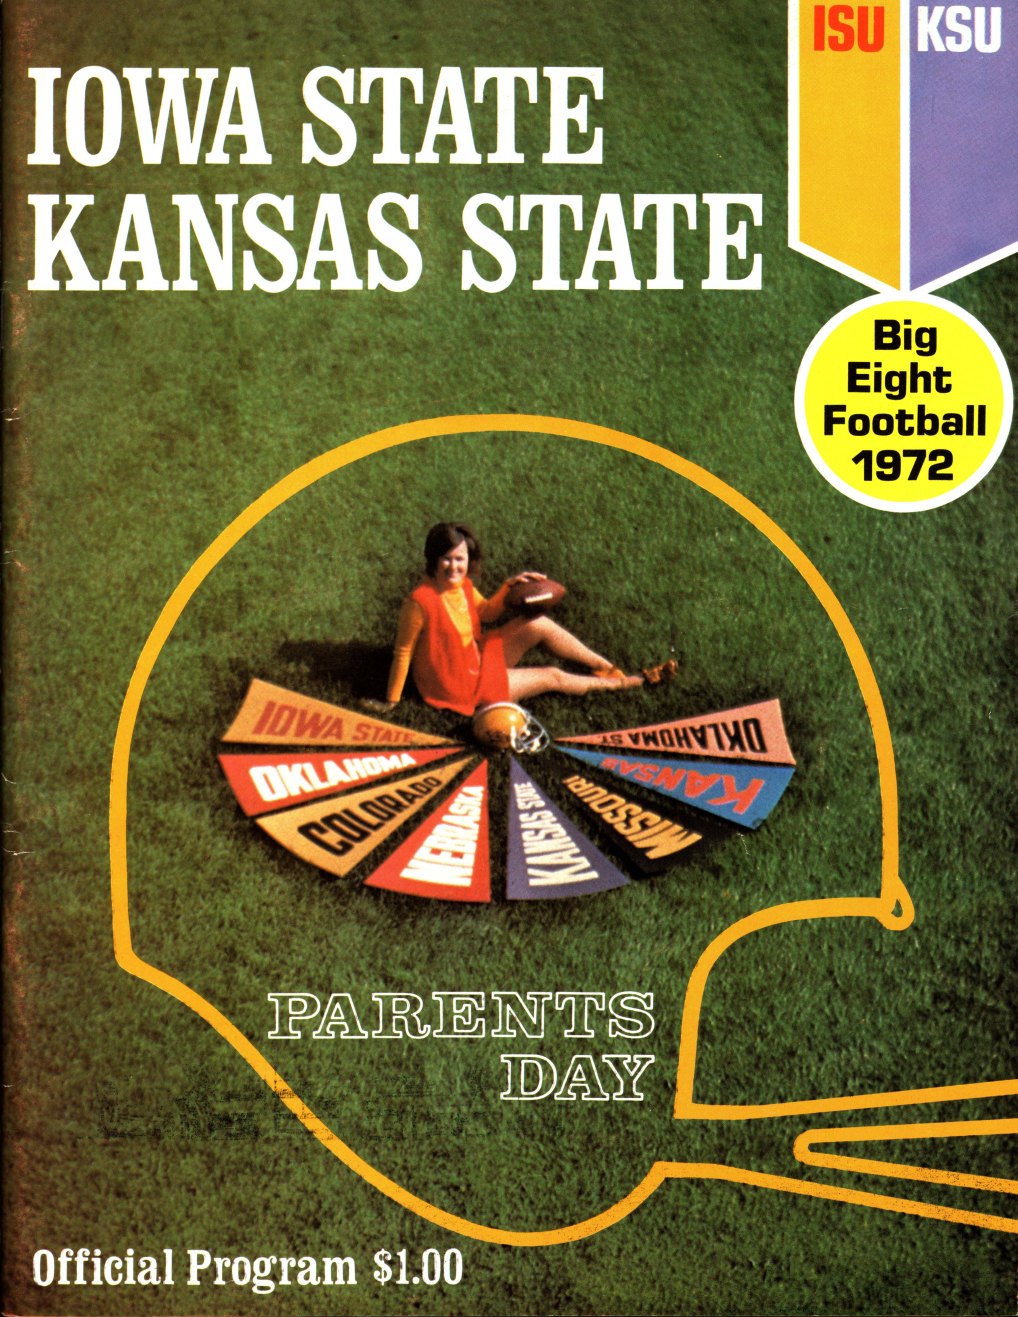 Colored image of poster from Iowa State v.s. Kansas State football game in 1972